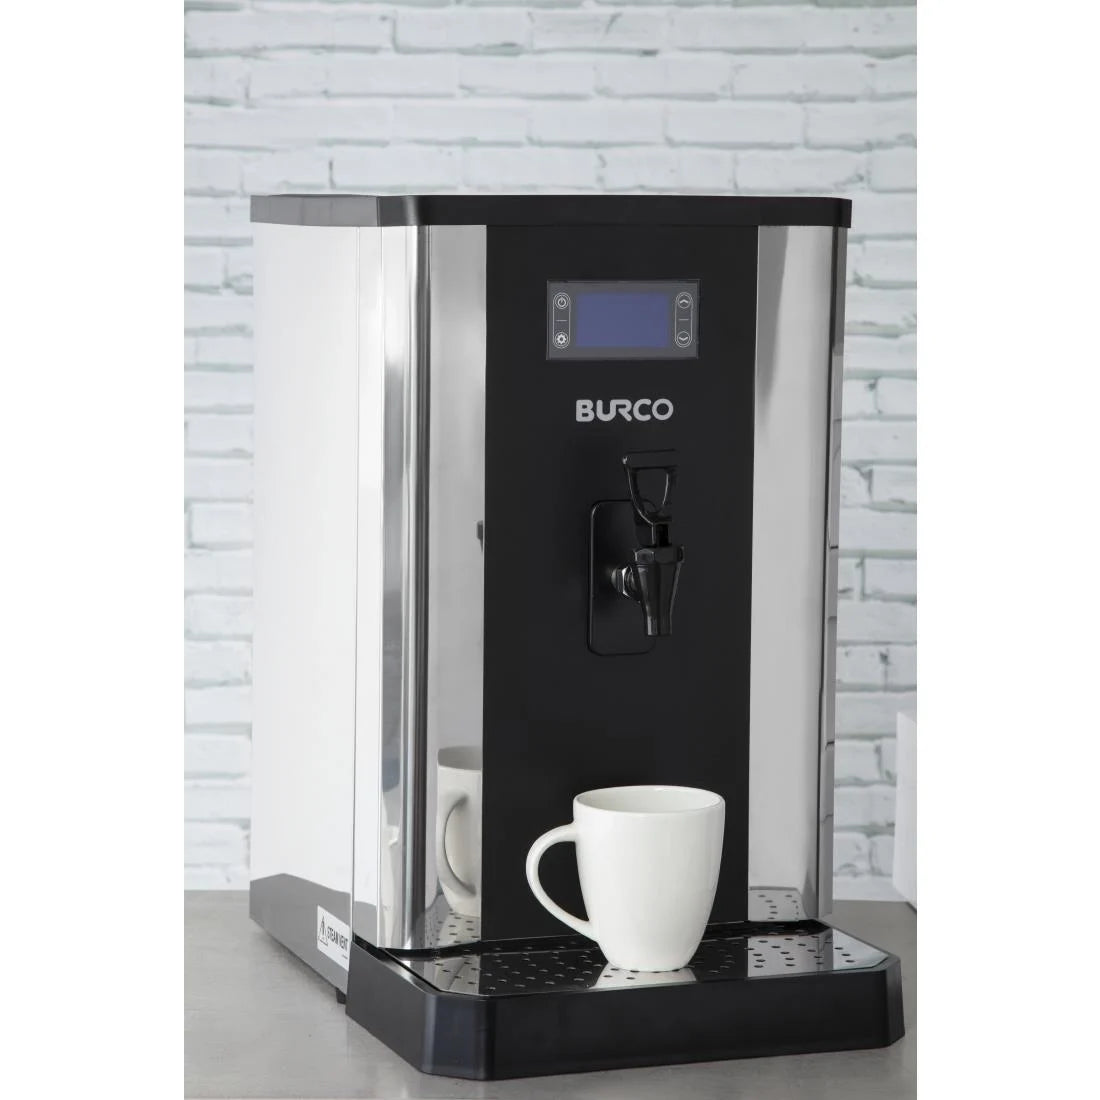 Burco 10Ltr Auto Fill Water Boiler with Filtration 069771 JD Catering Equipment Solutions Ltd